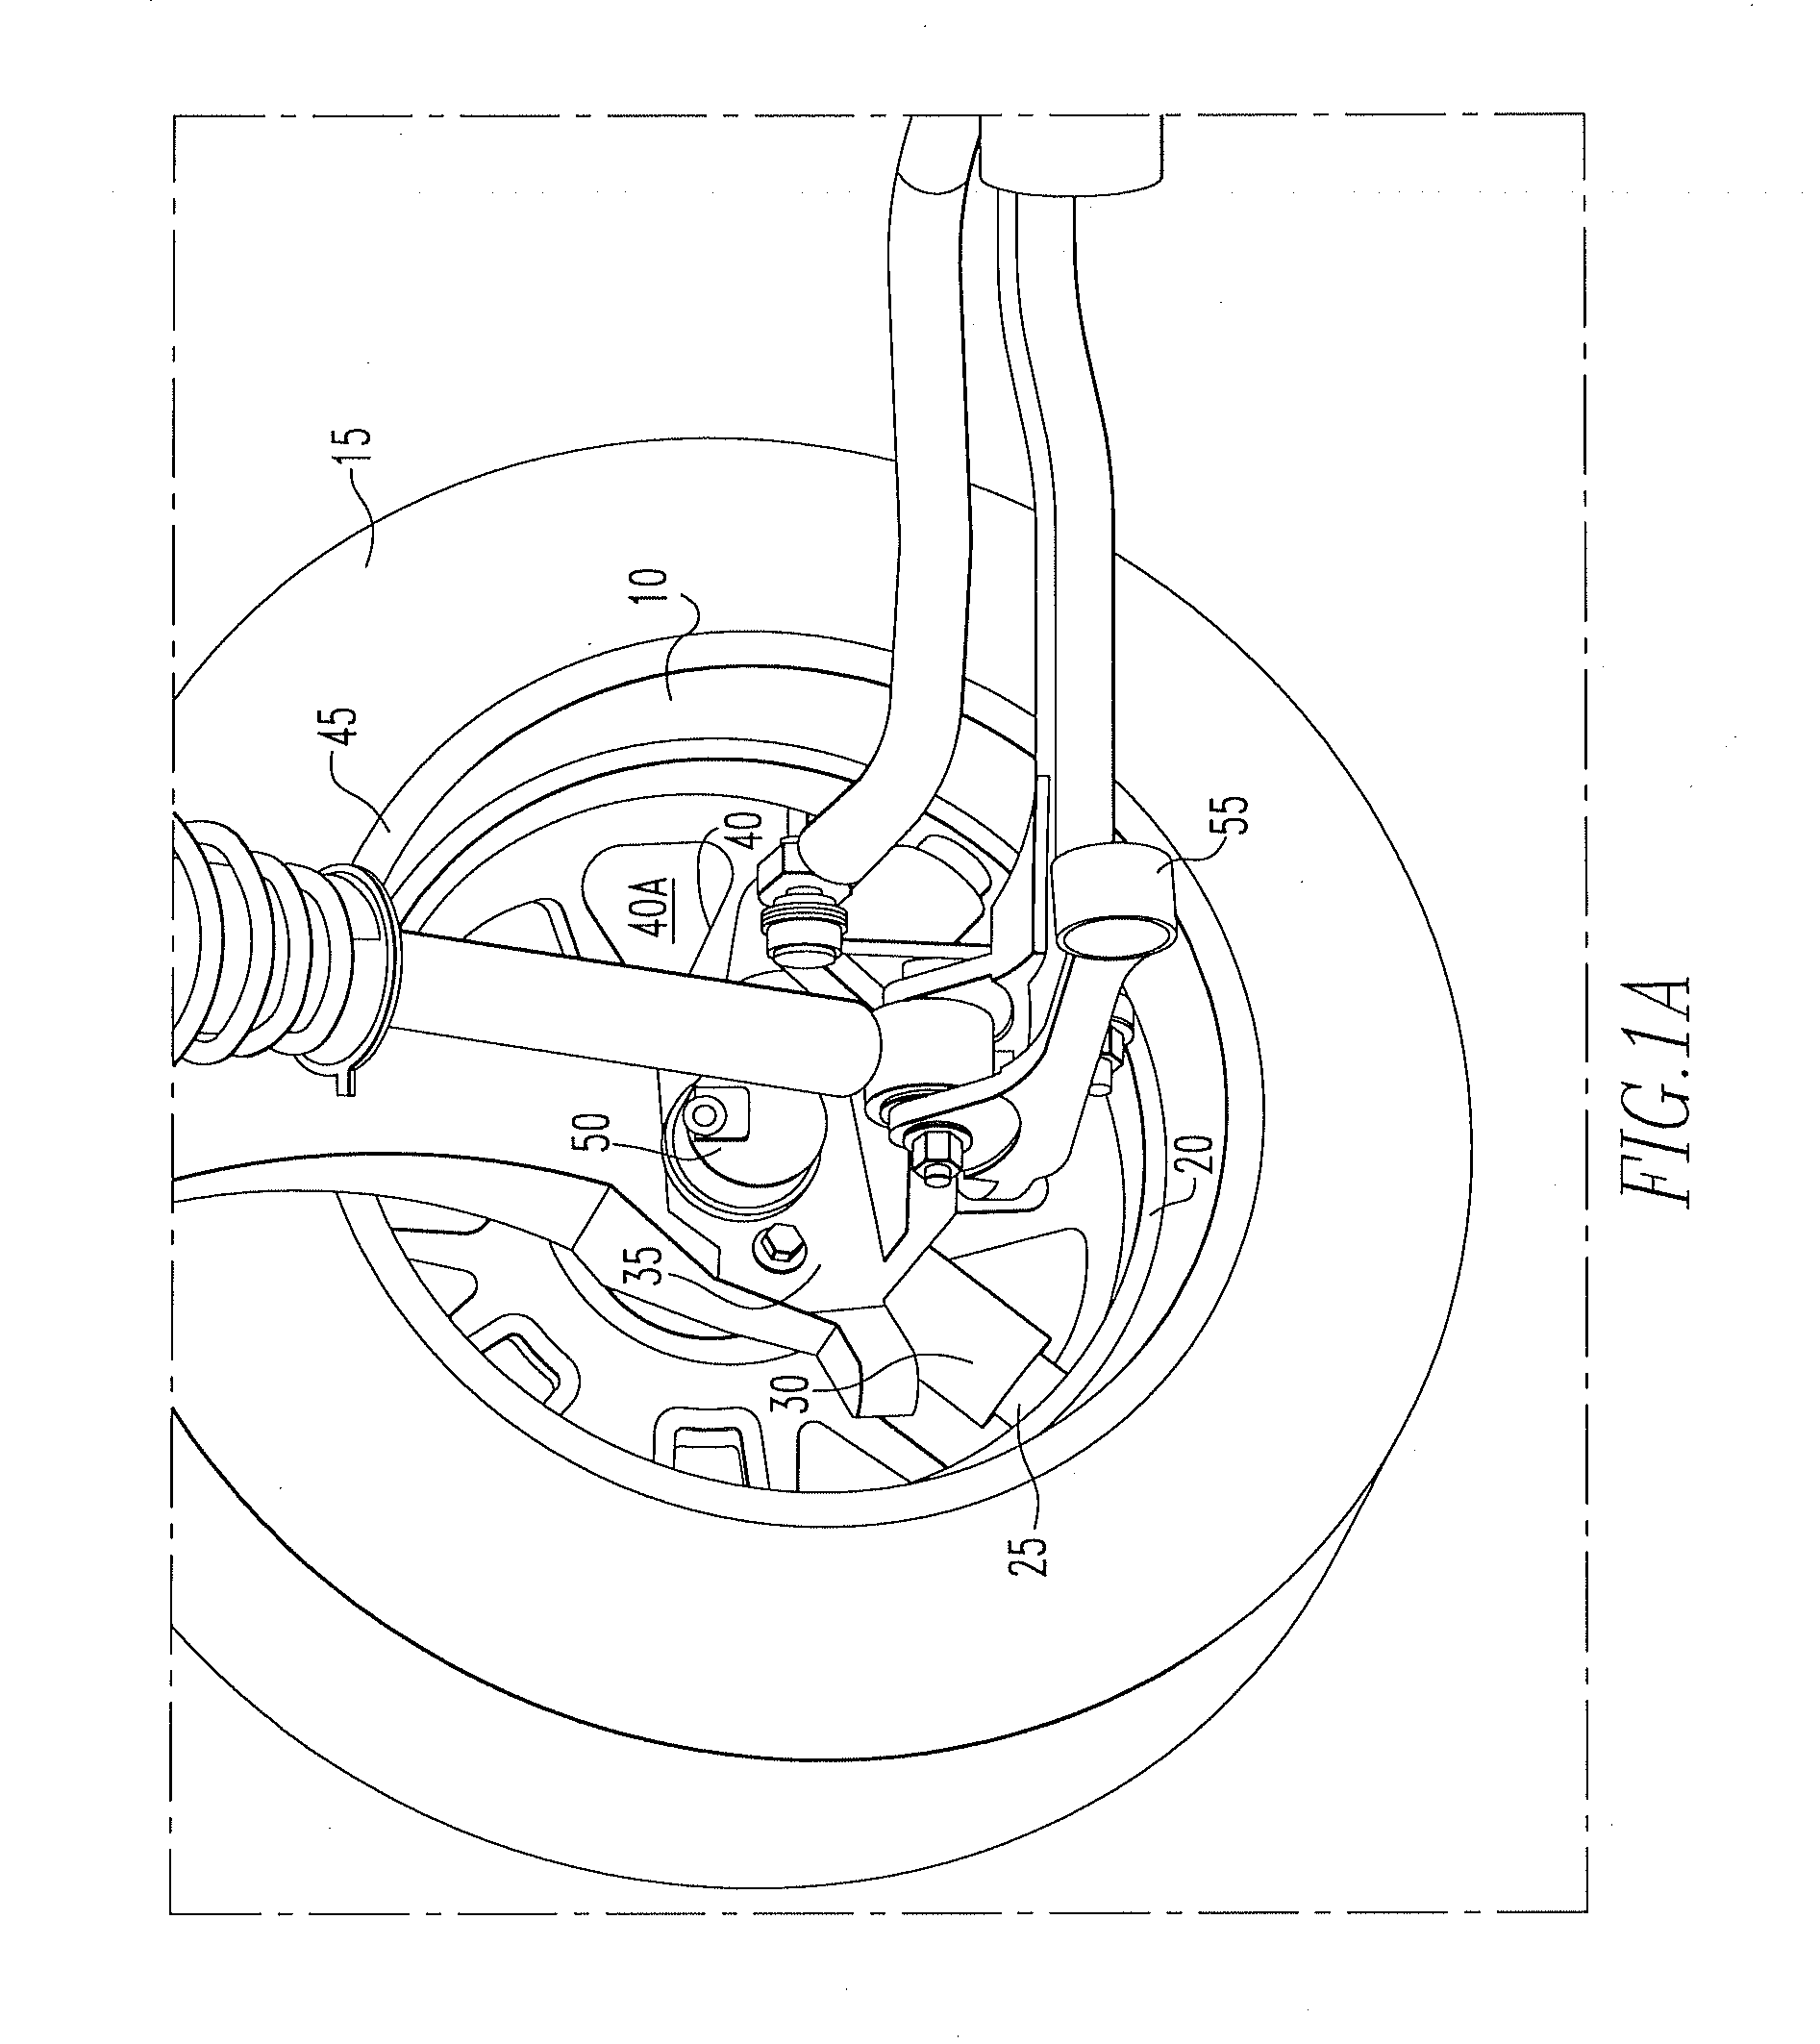 Integrated brake, suspension and wheel system